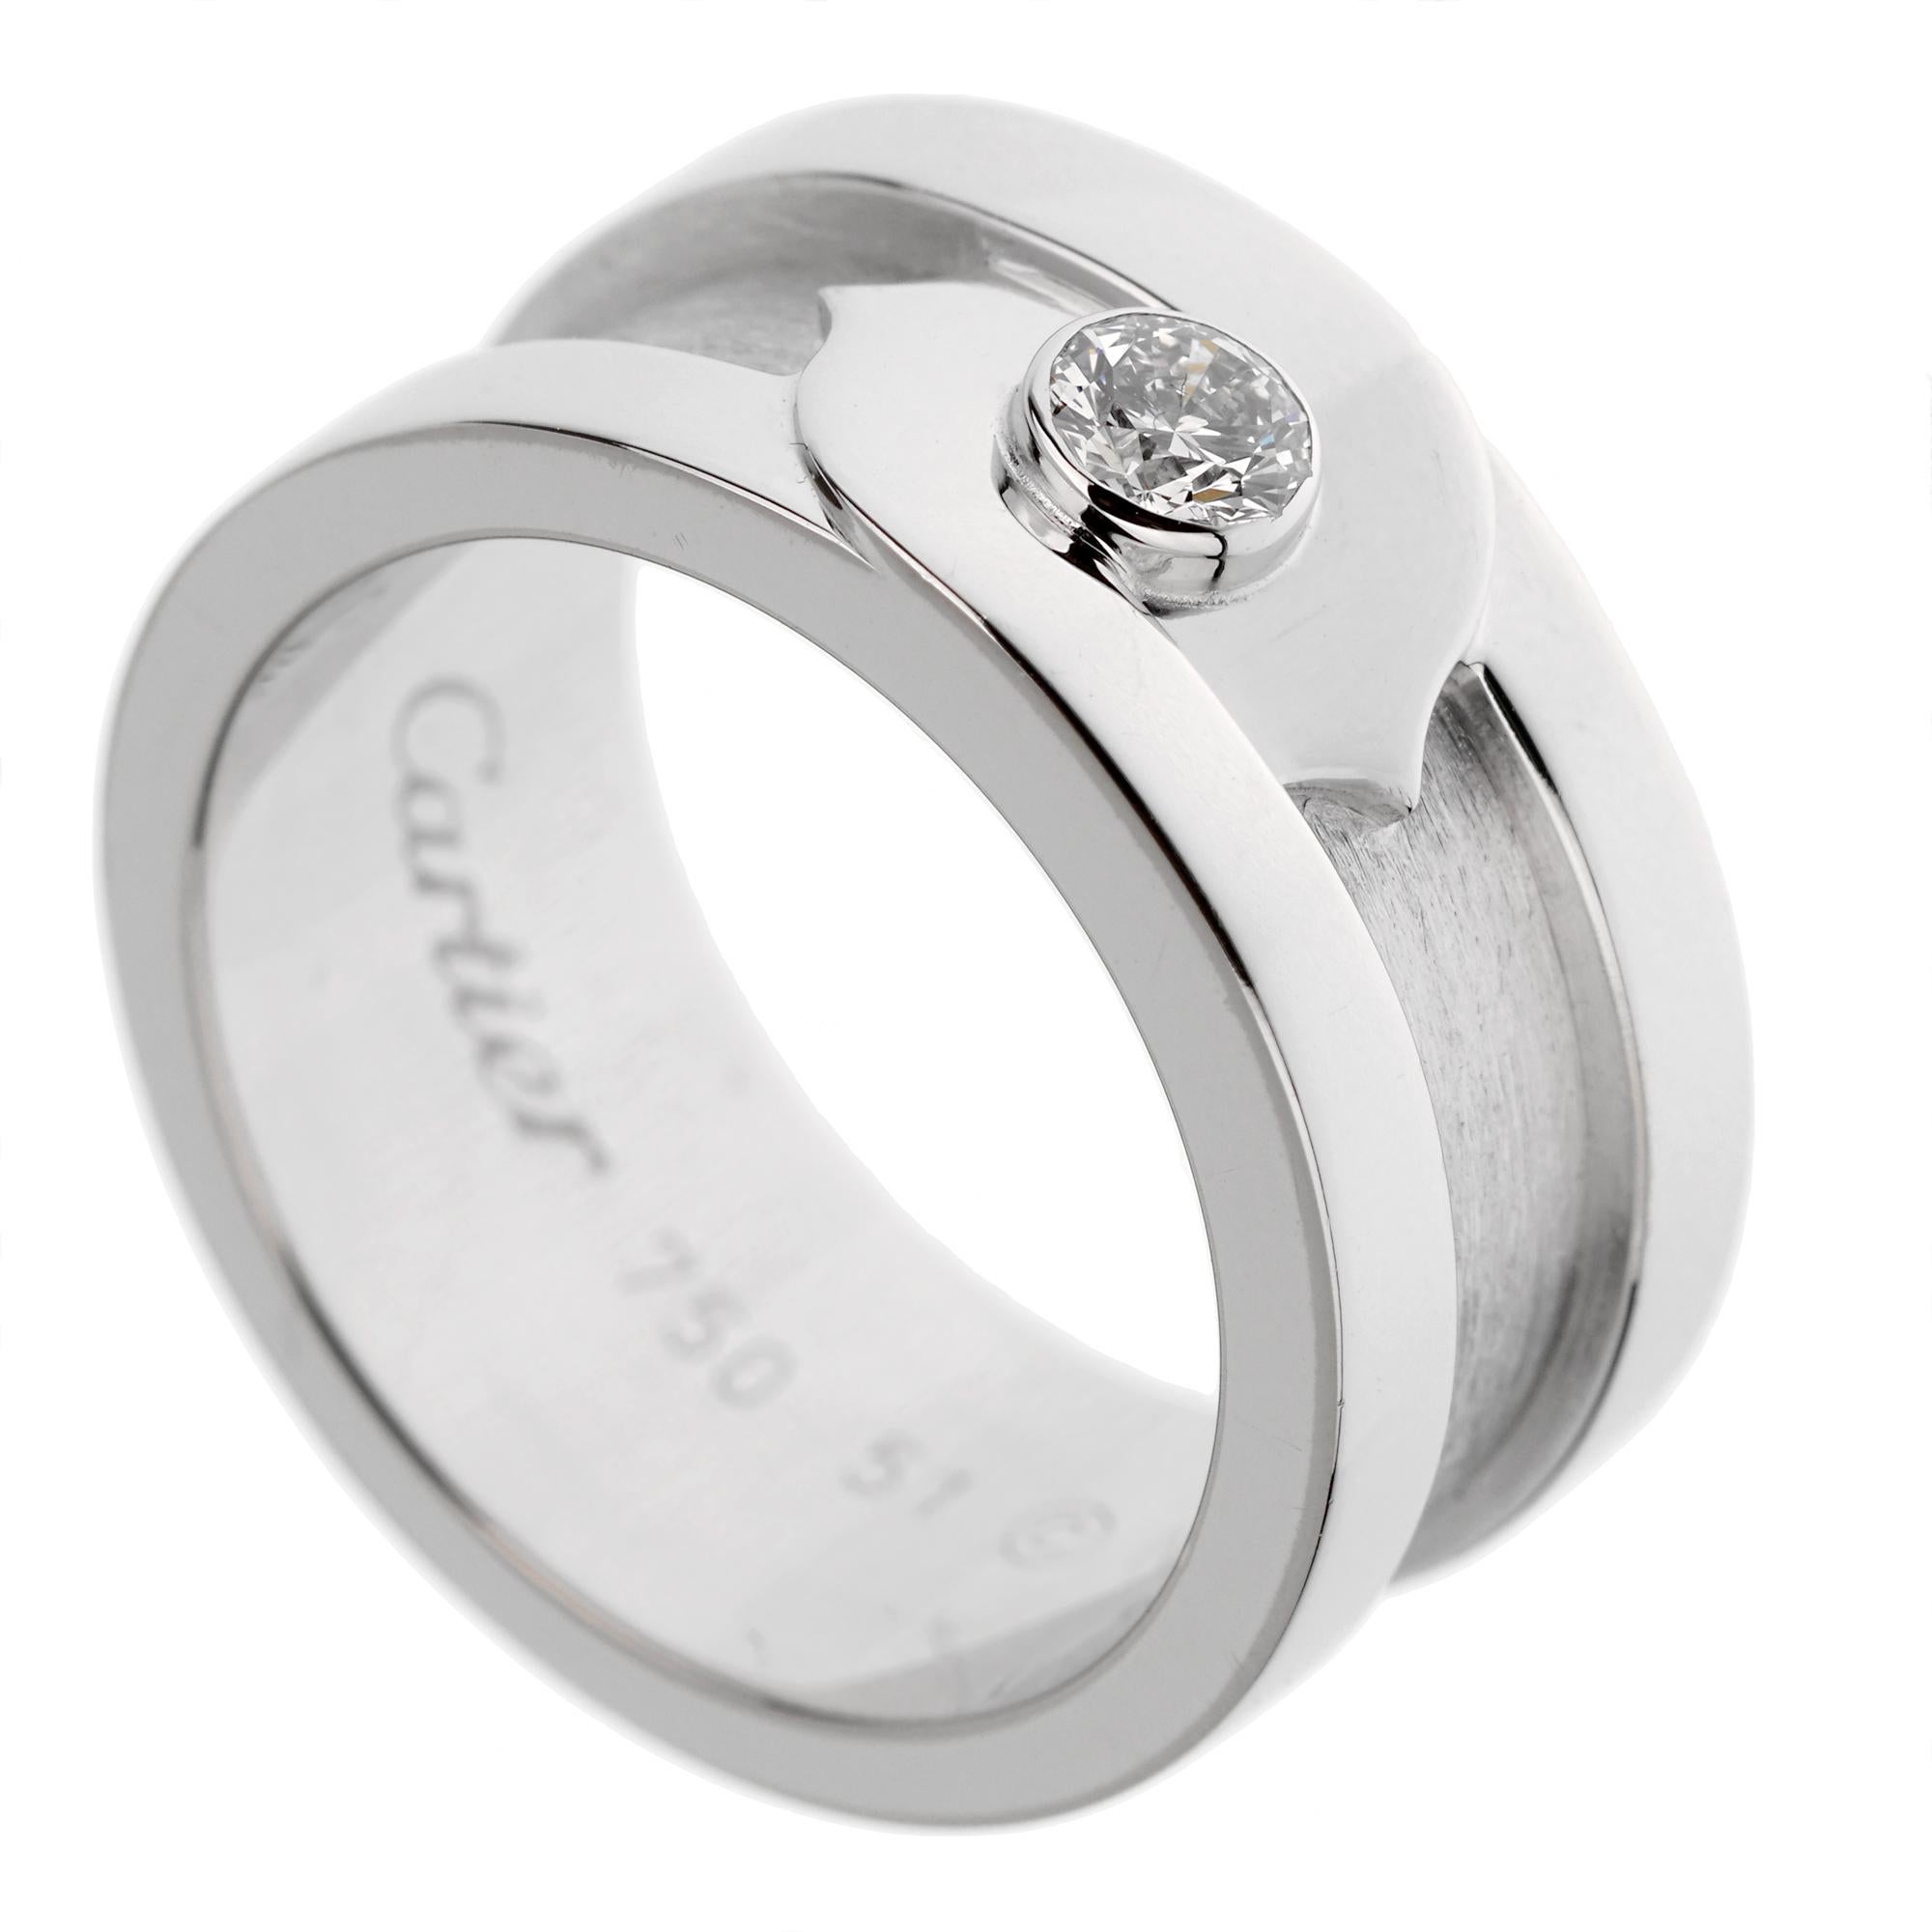 A chic Cartier diamond solitaire ring from the C de Cartier collection showcasing an original Cartier round brilliant cut diamond set in 18k white gold. The ring is circa 2005 and comes with the original Cartier certificate. Size 51 eu / 5 us